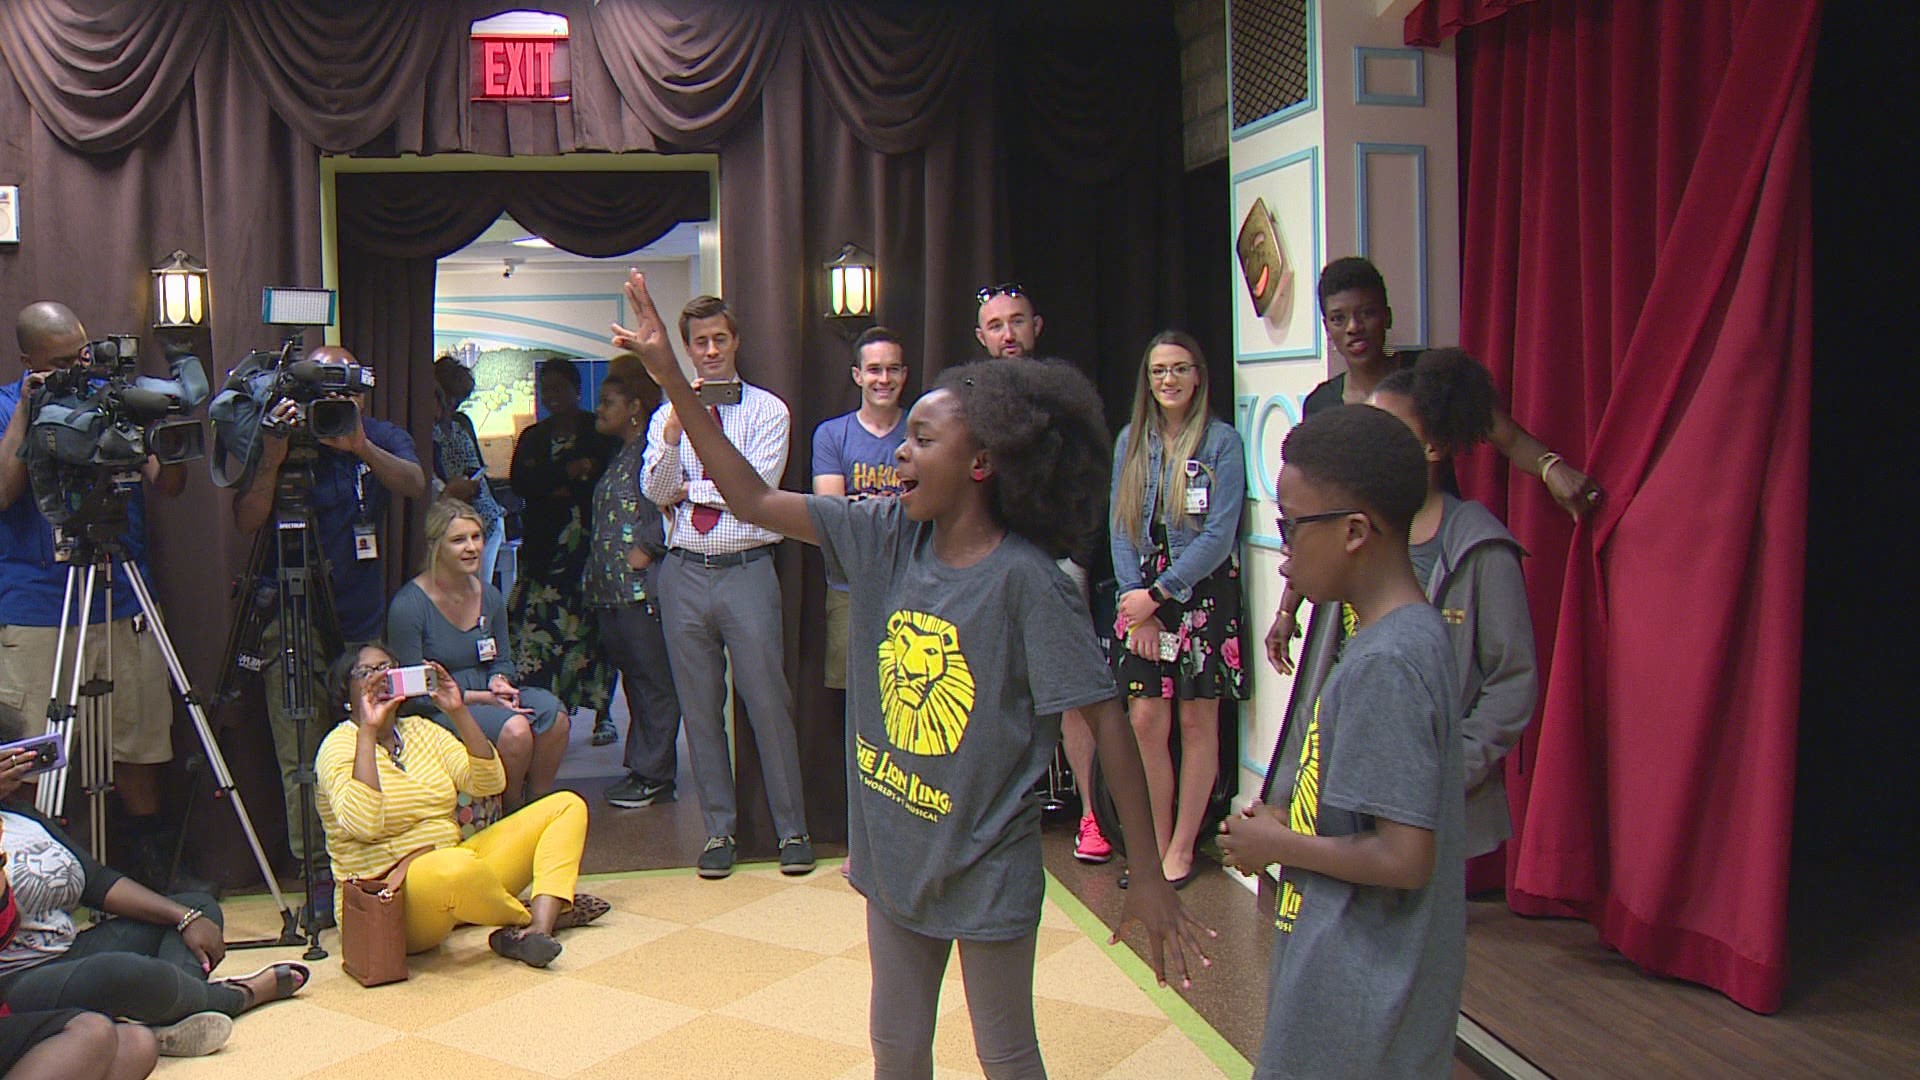 Cast of The Lion King lifts spirits at children's hospital